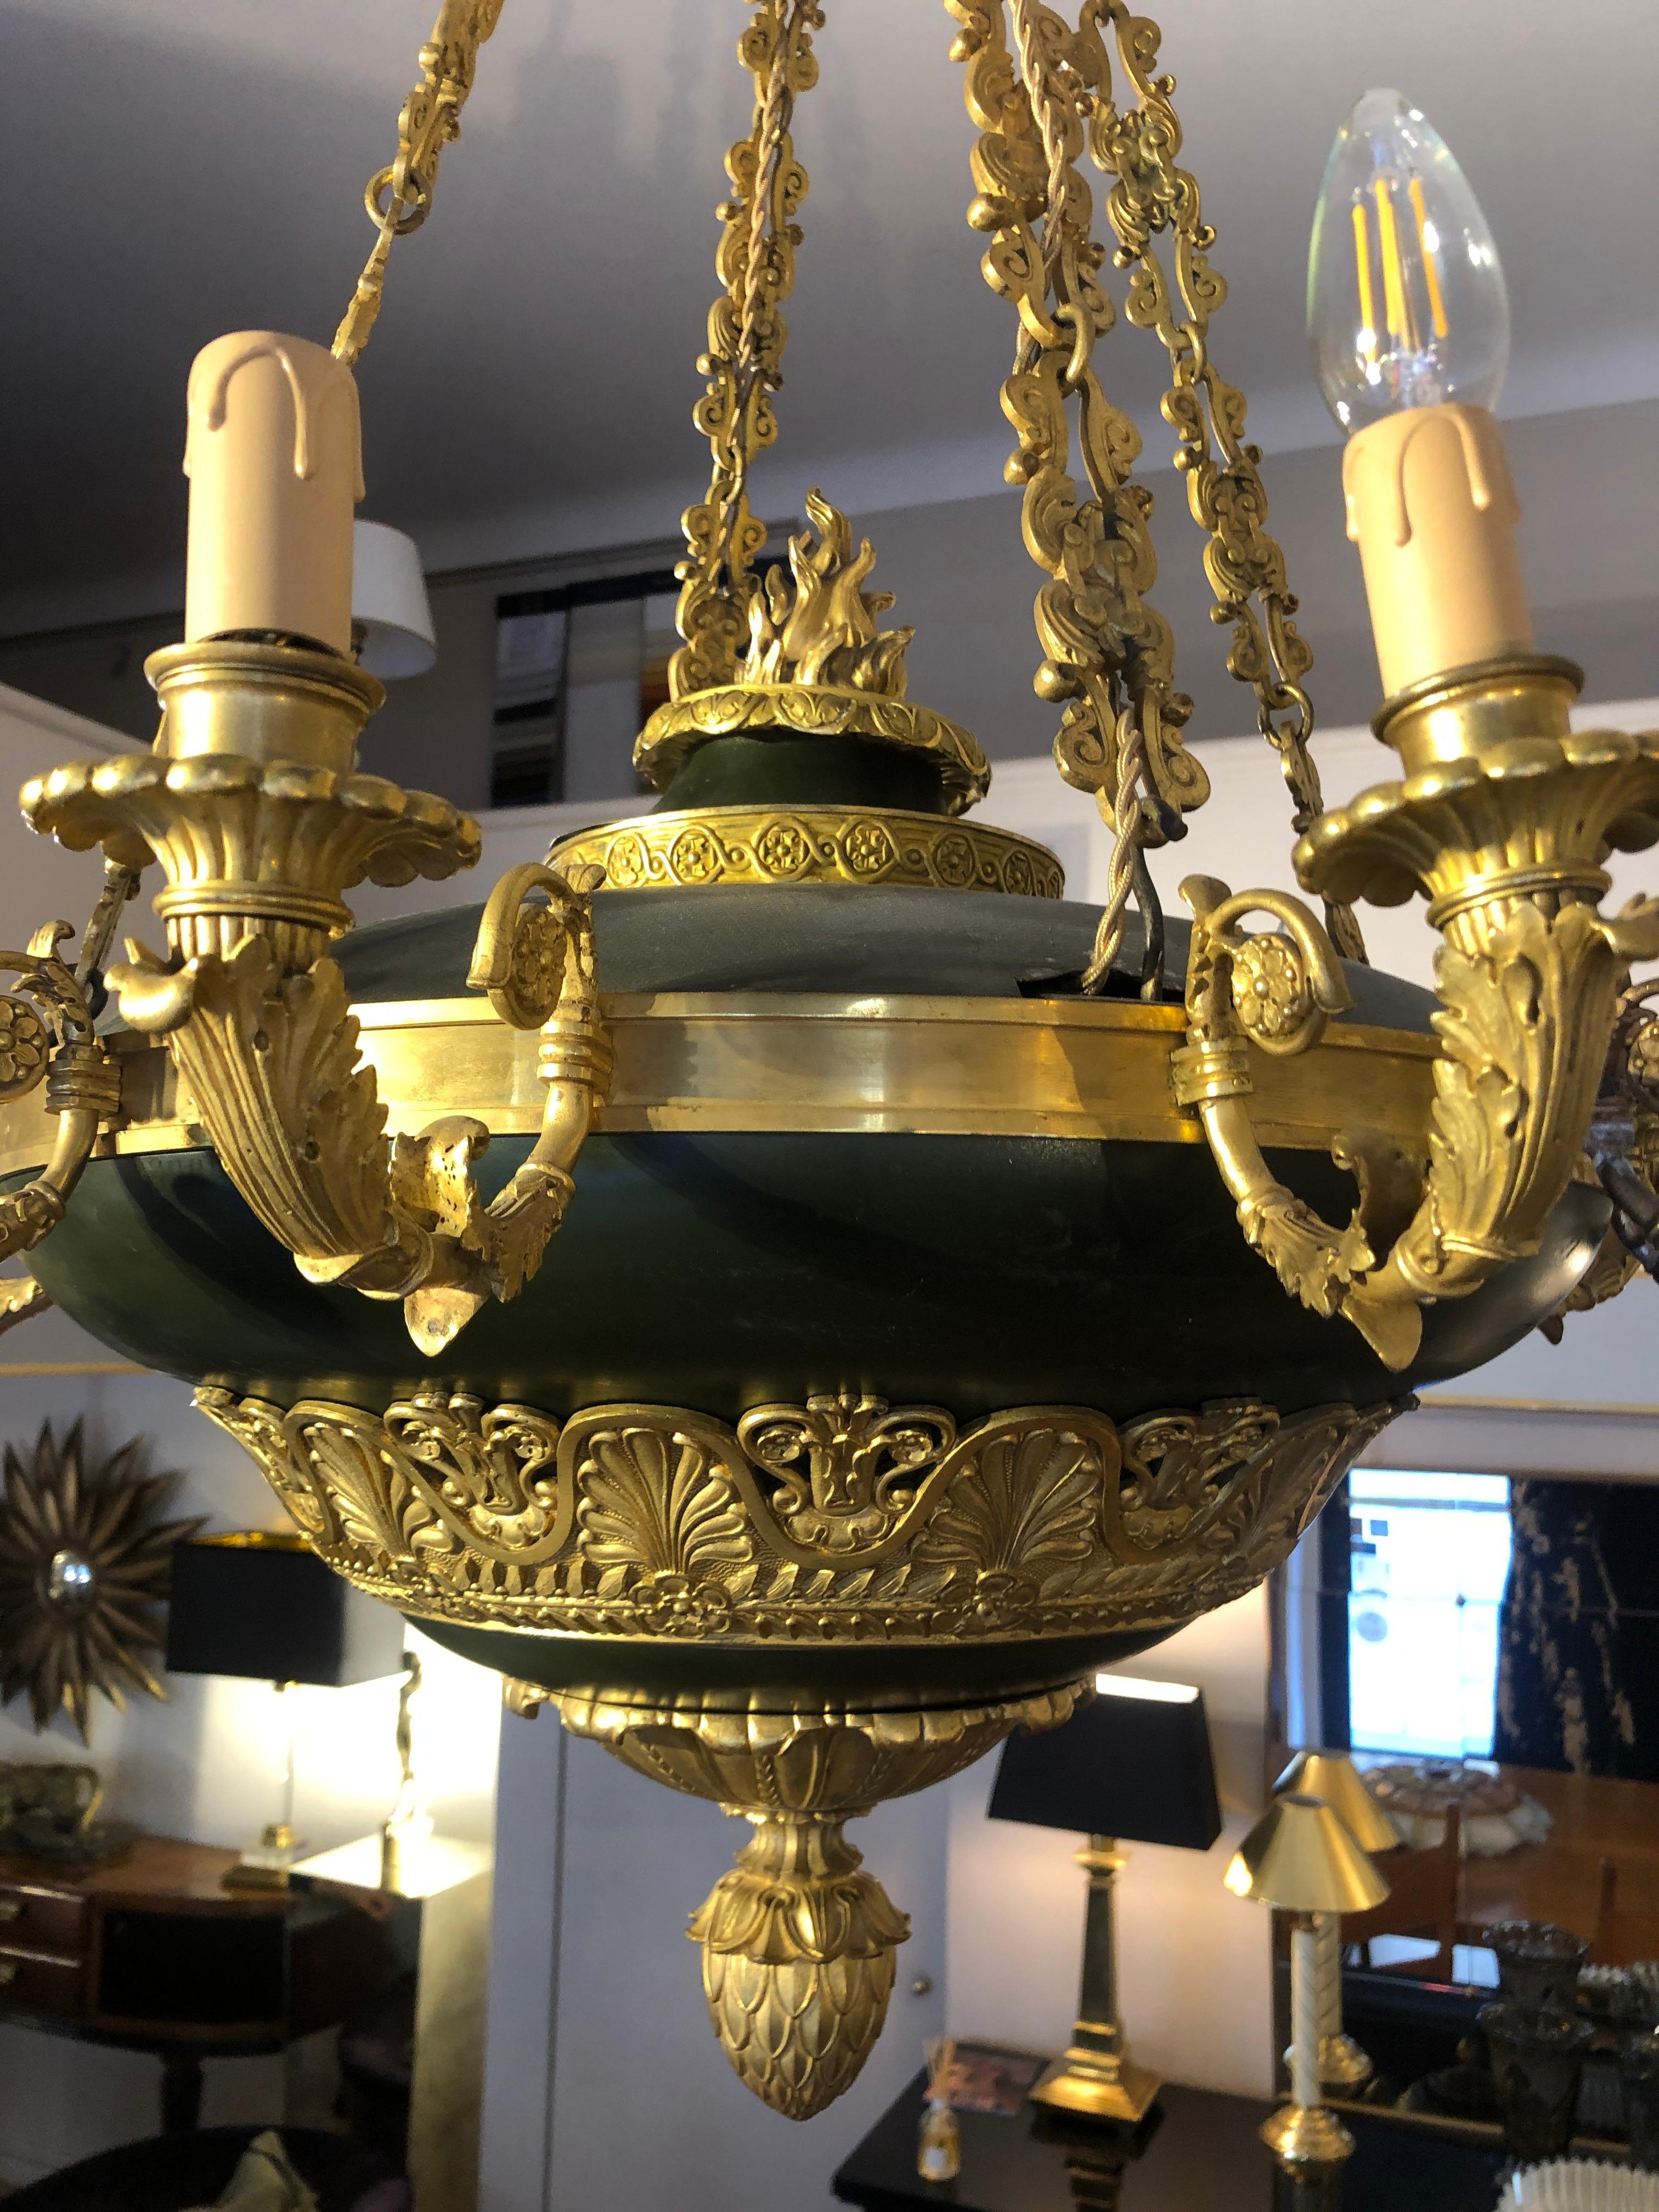 Napoleon III golden bronze and dark green lacquer twelve-light chandelier 

Chandelier from France from Napoleon III late 19th century period. The chandelier features 12-light. The rounded dark green lacquered central body is enriched with golden